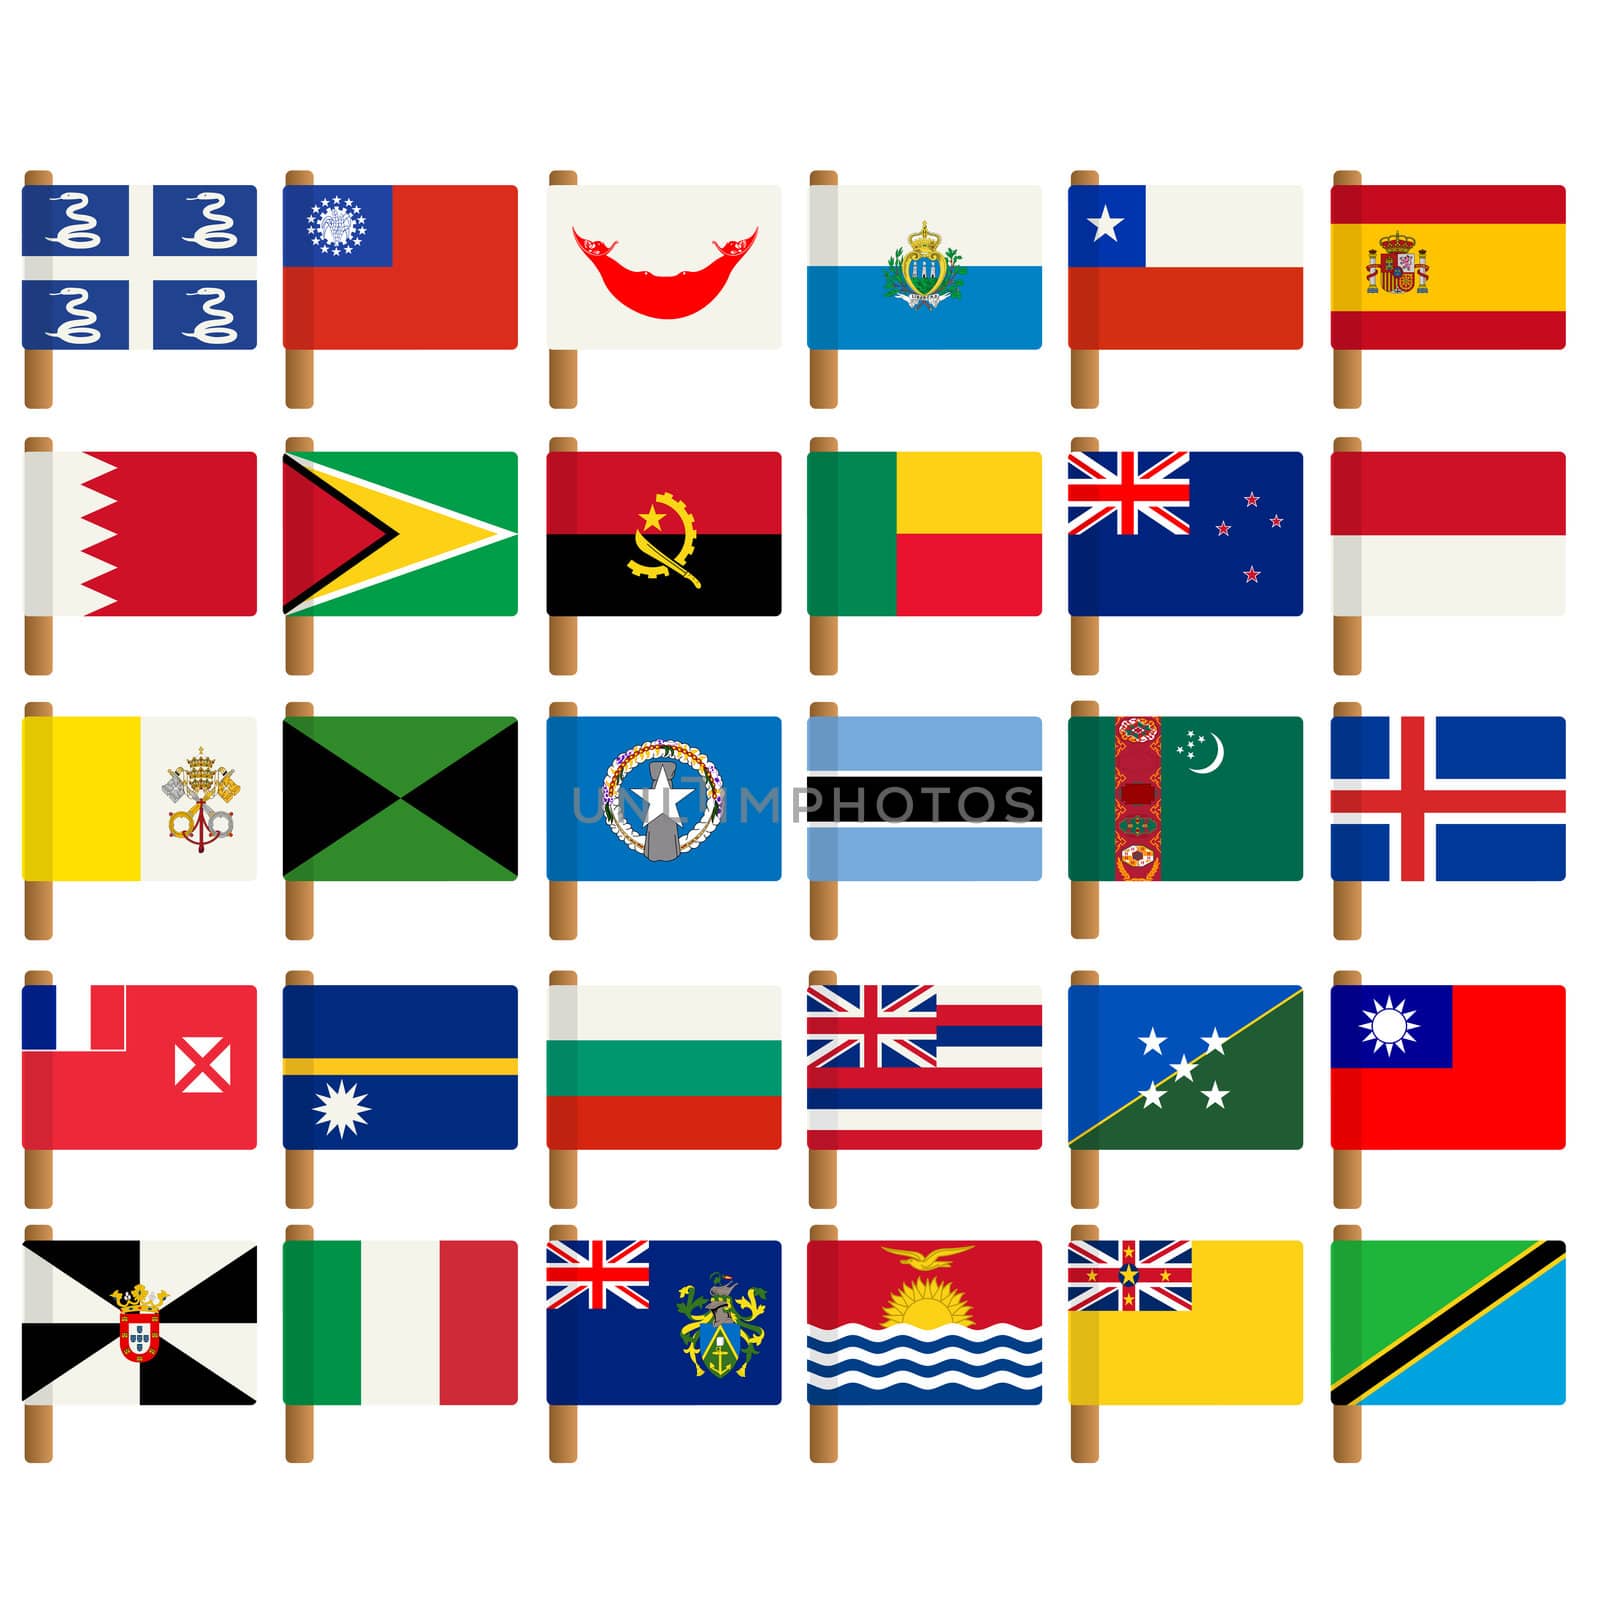 World flag icons set 6 by Lirch